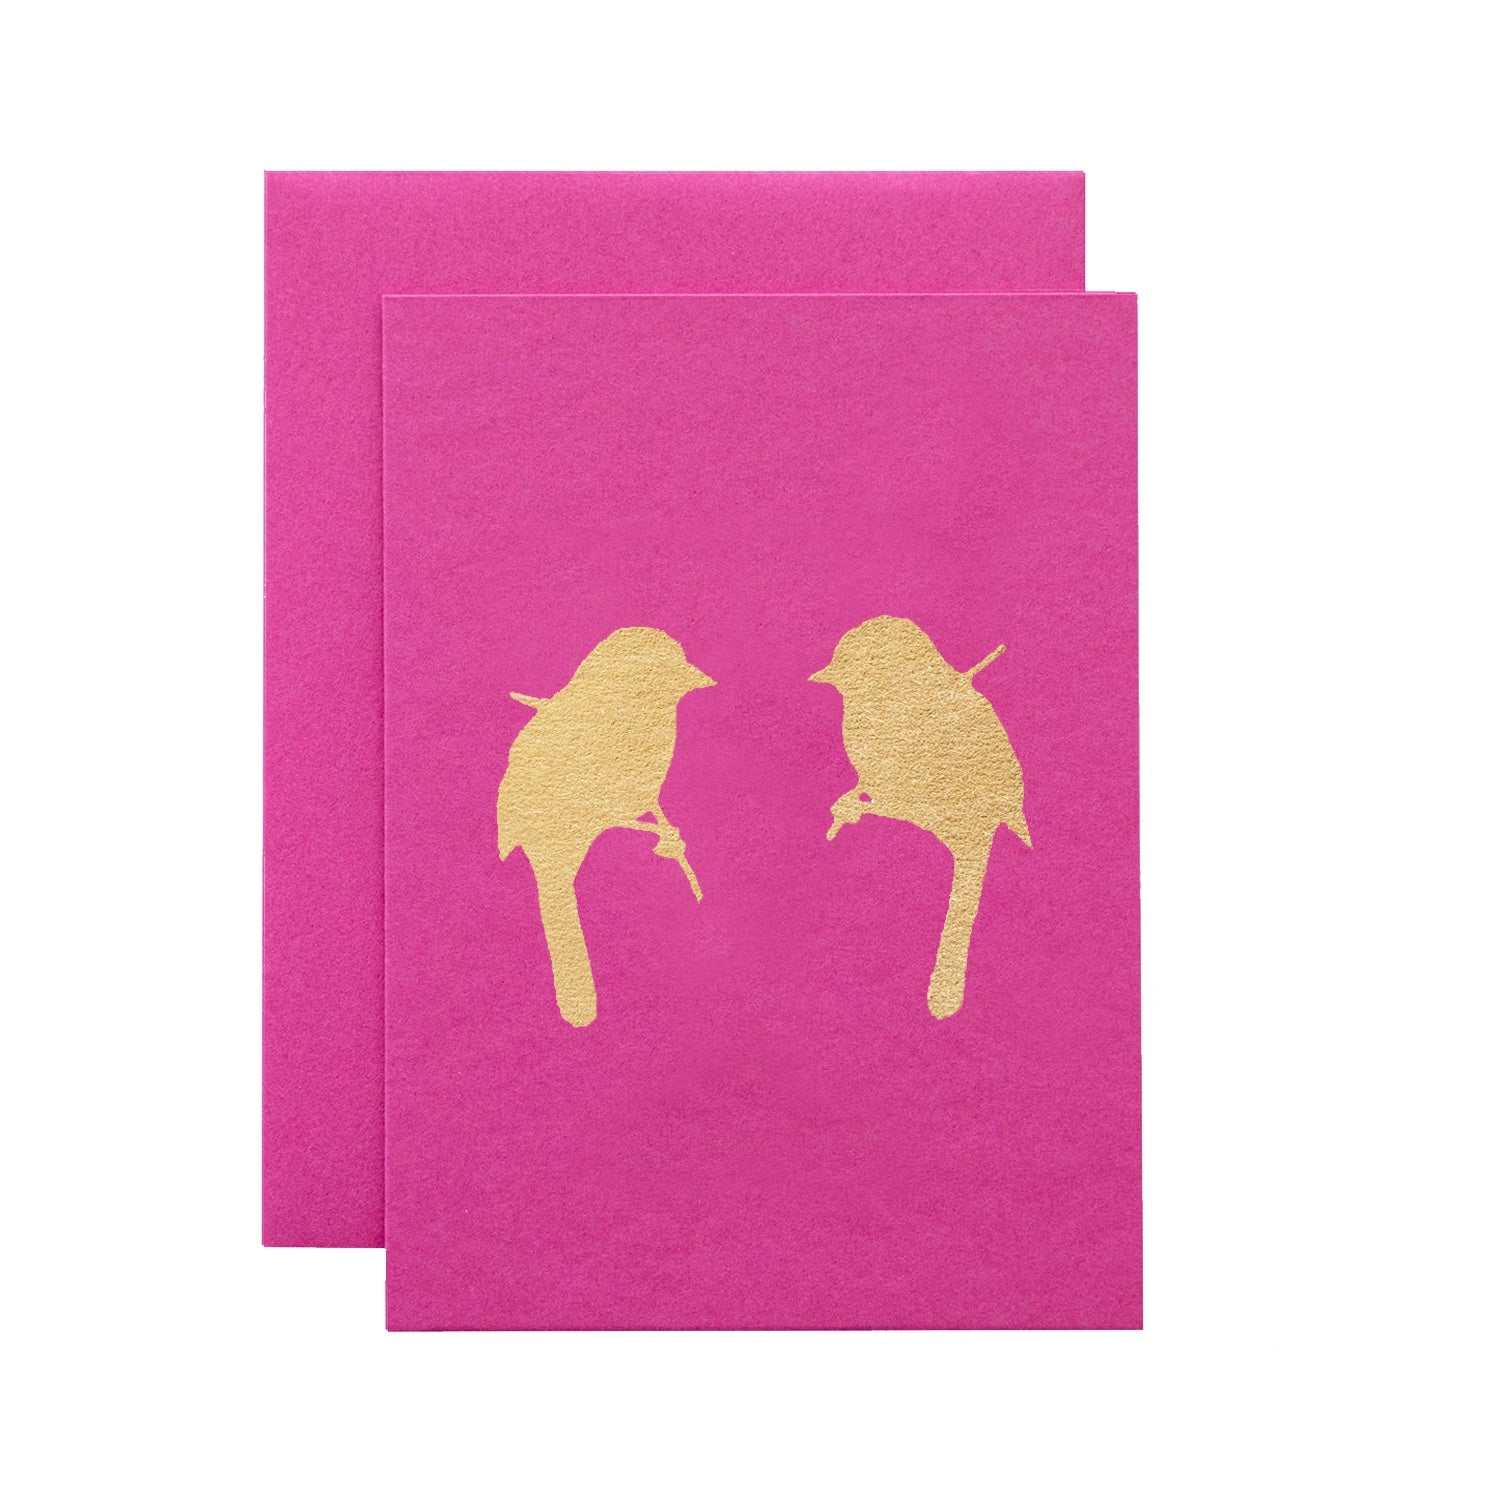 Hand-crafted Pink Songbirds Card featuring two gold birds on a pink card by Hester &amp; Cook.